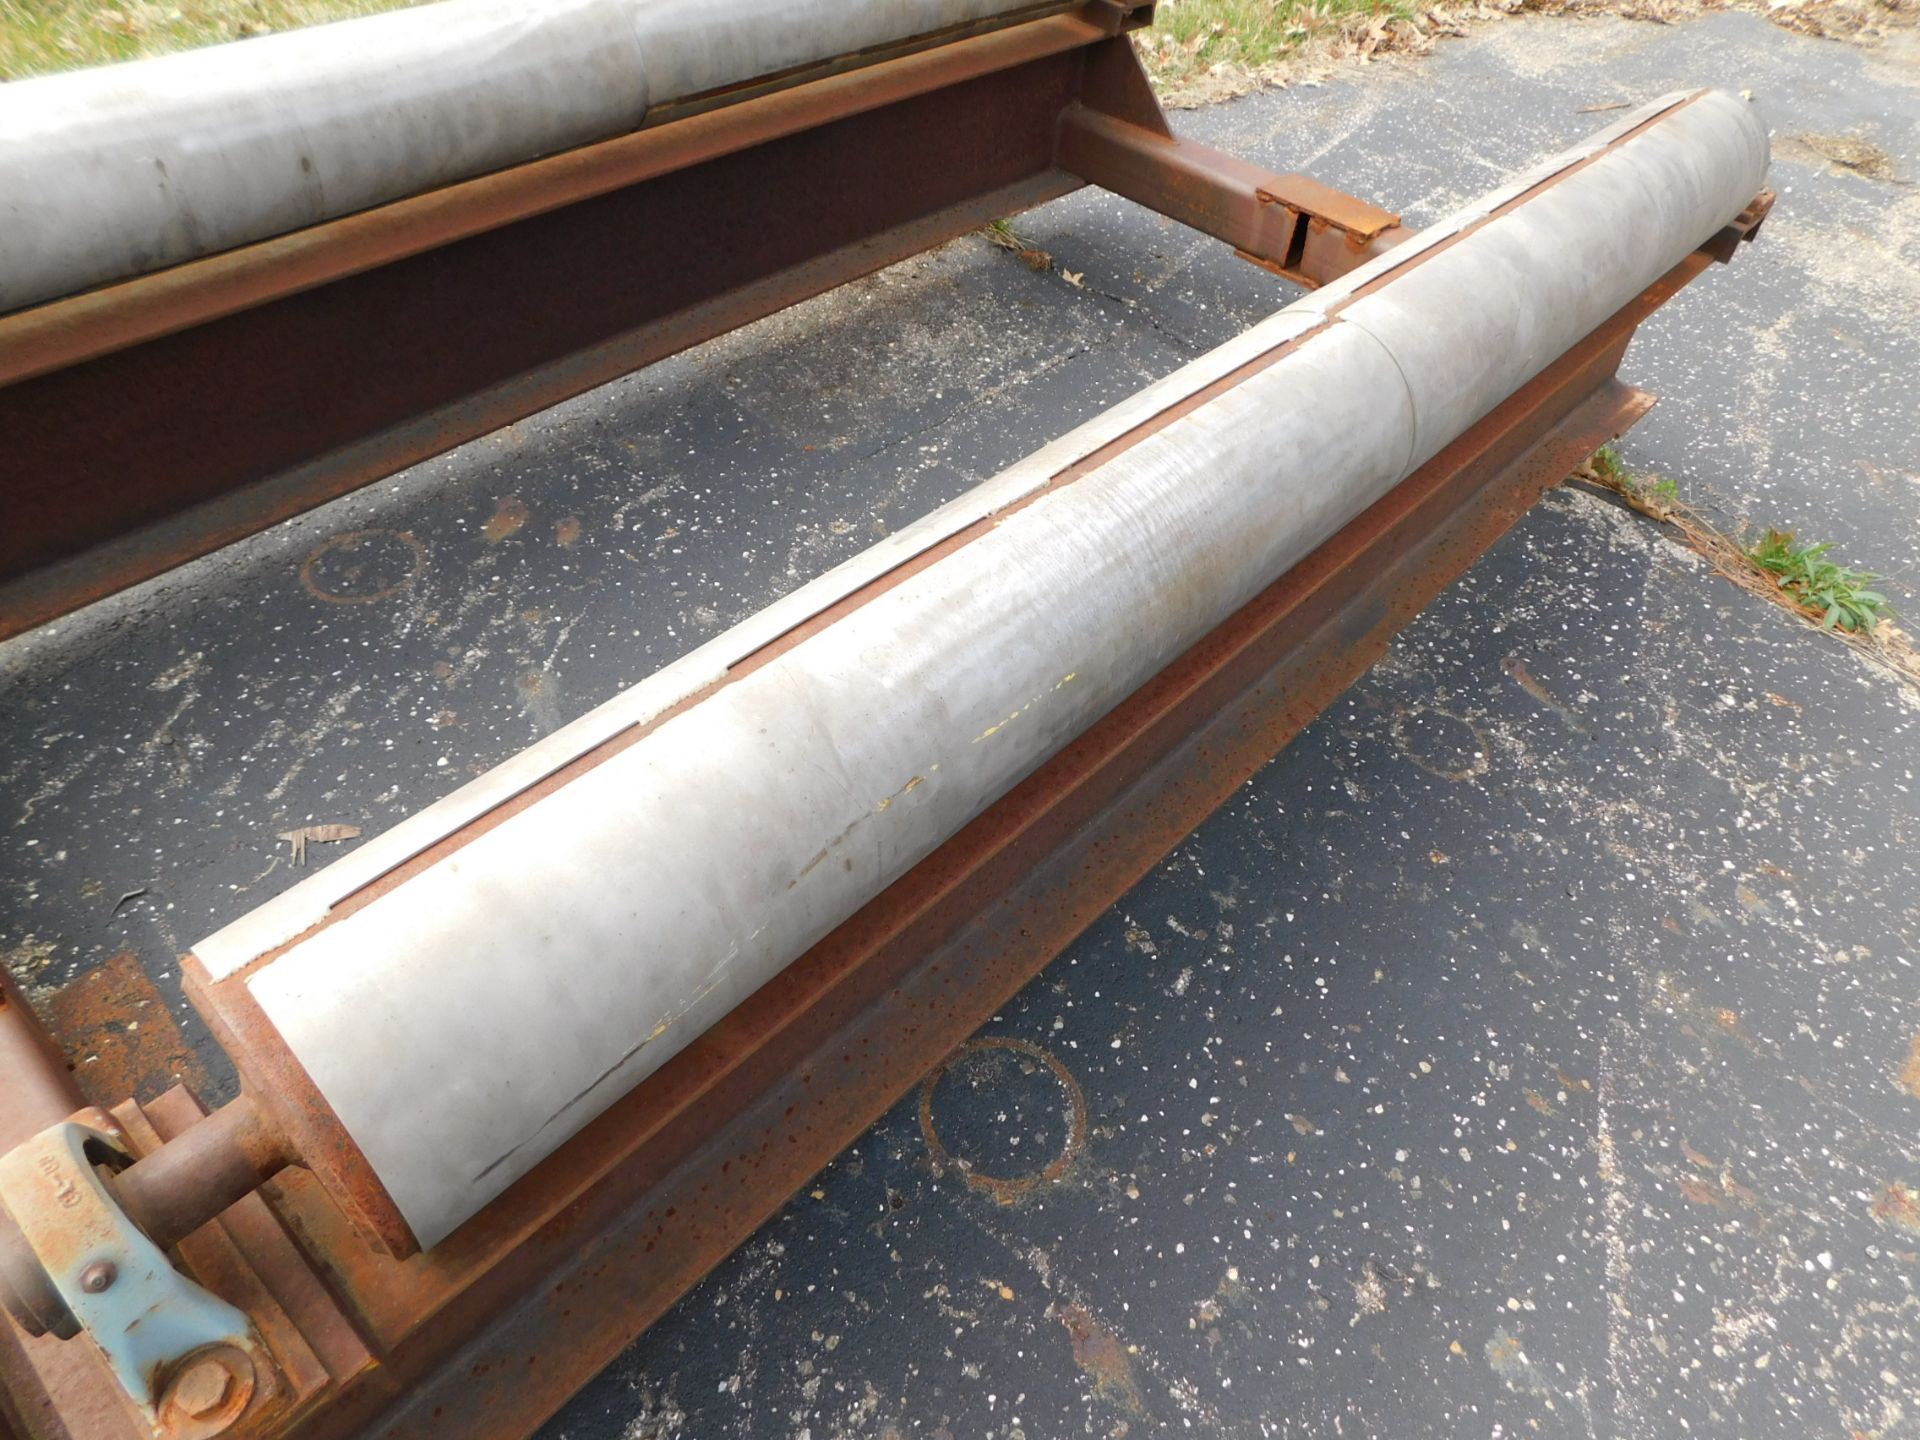 Idler Roll Set, Welded Construction, 20' Overall Length, 4' Overall Width - Image 2 of 3